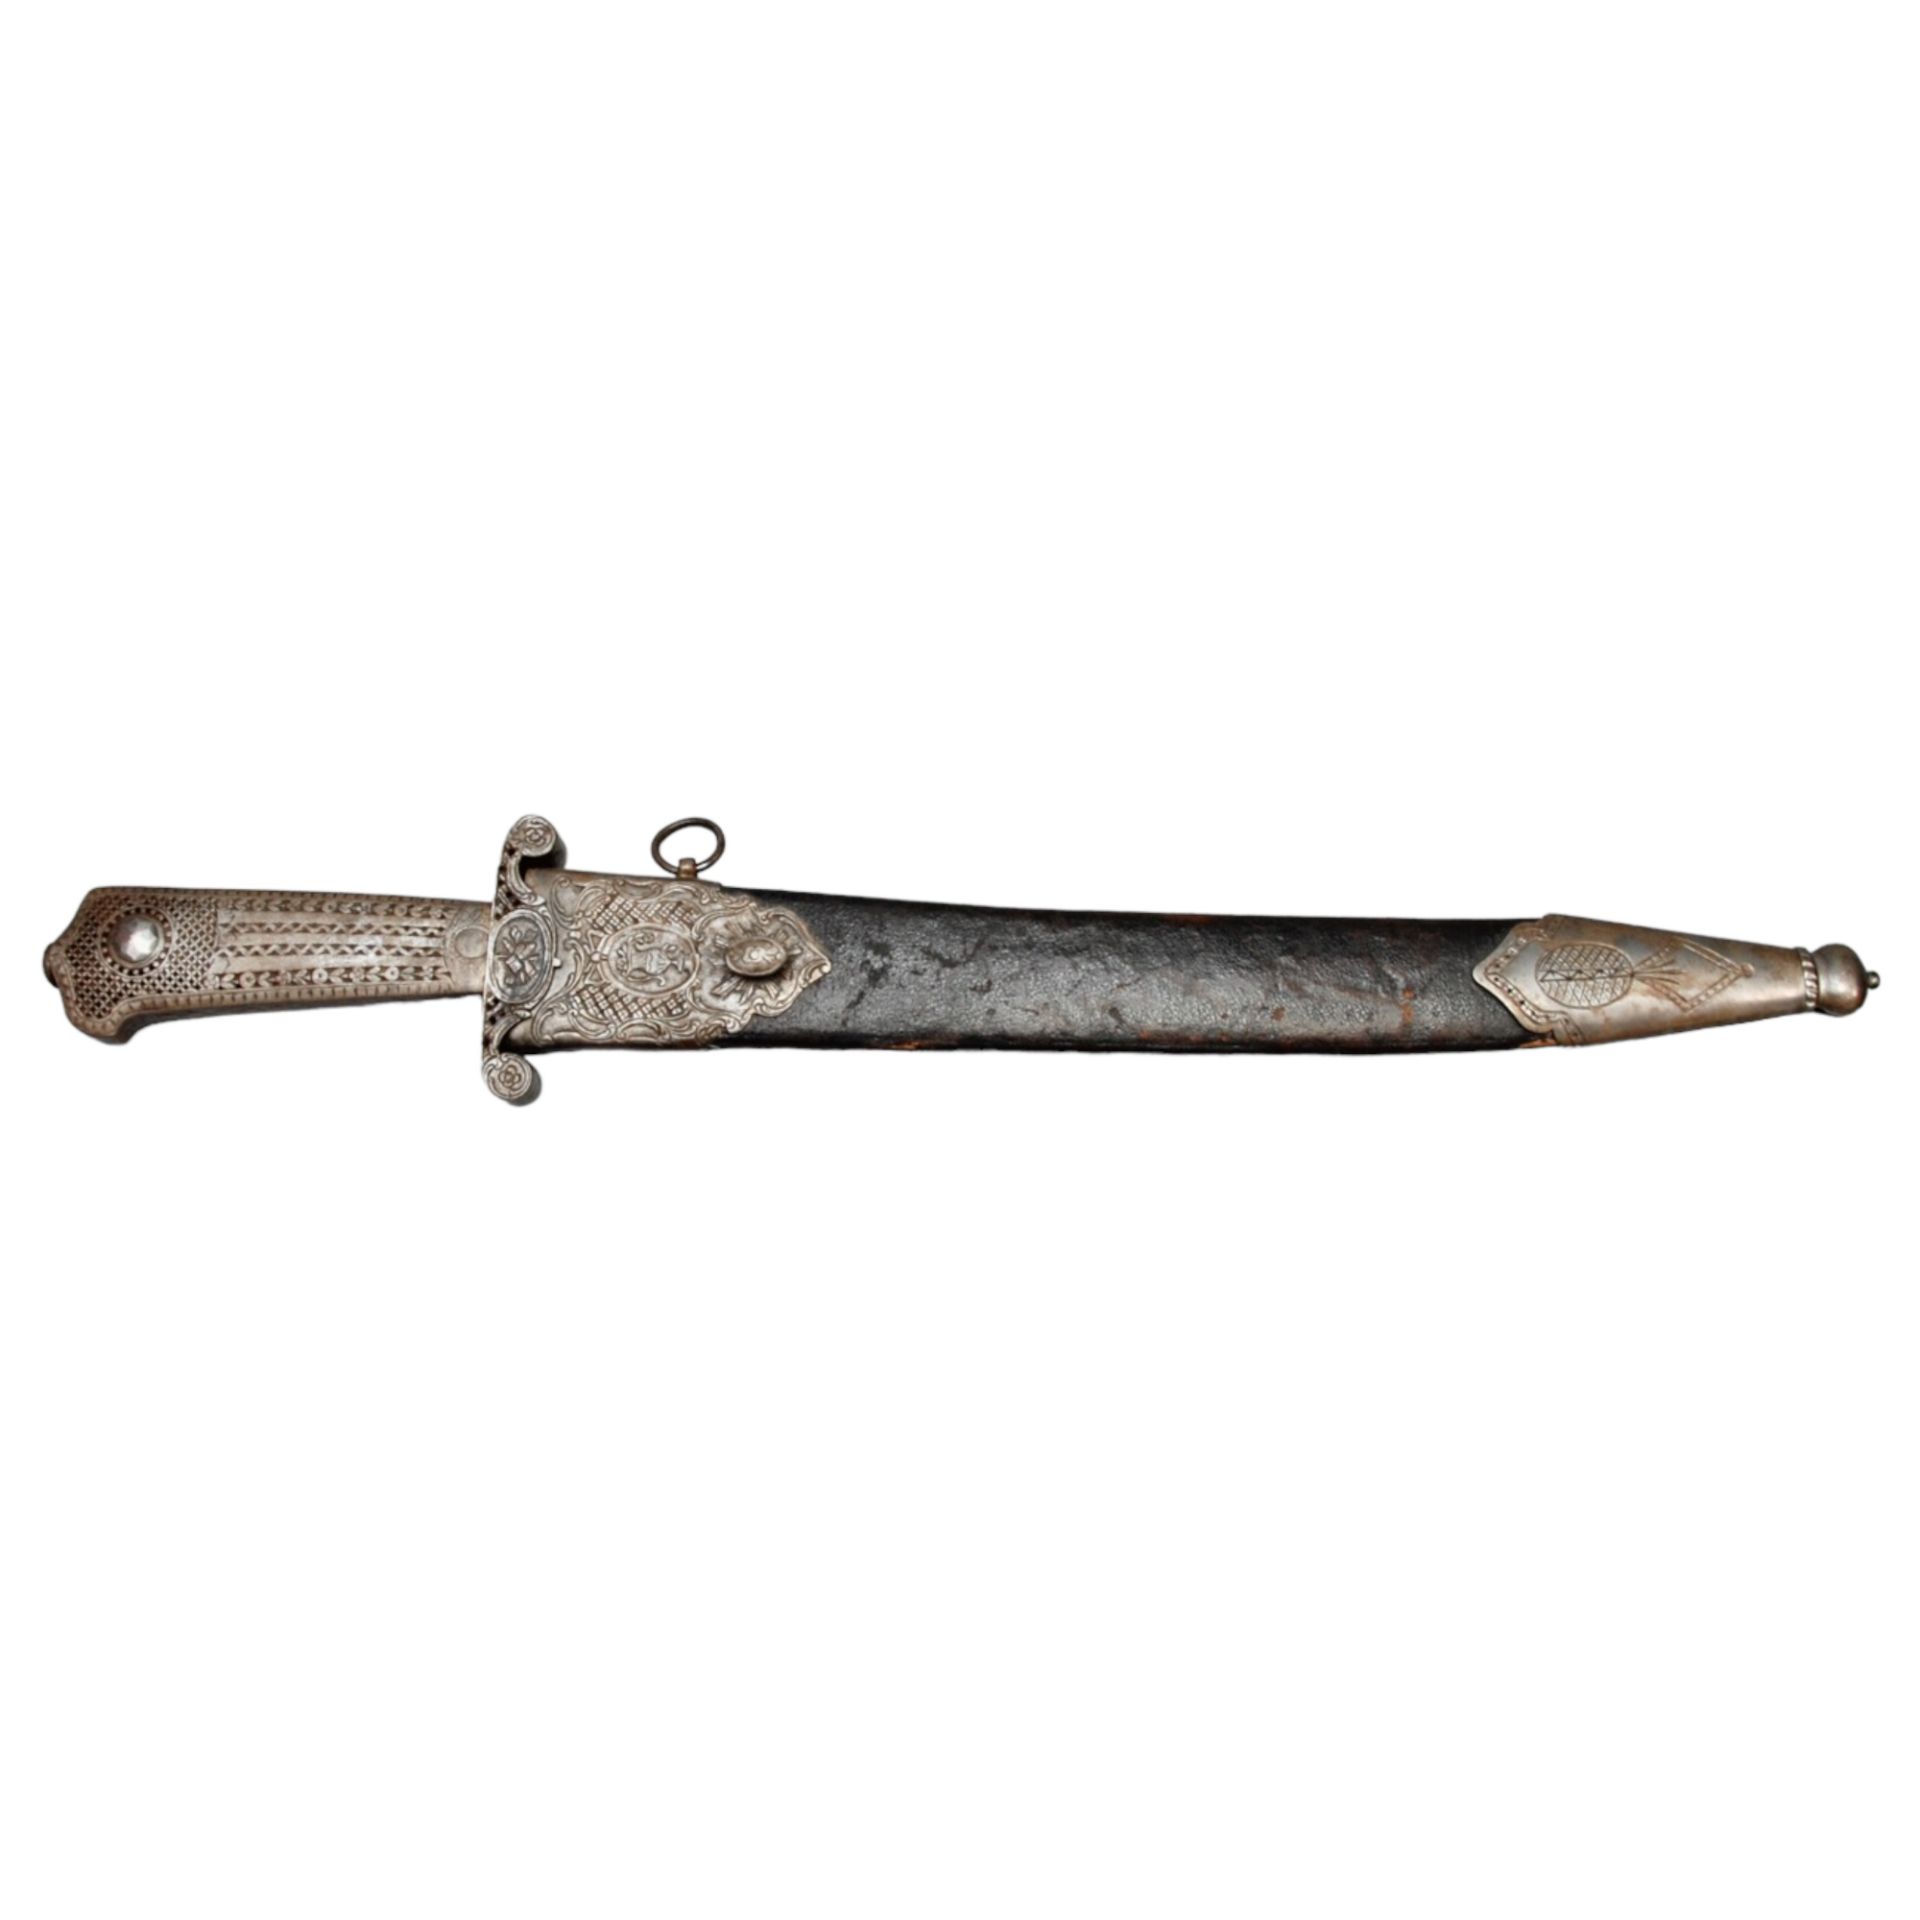 A Hunting dagger, France, second half of the 18th century. - Image 2 of 6